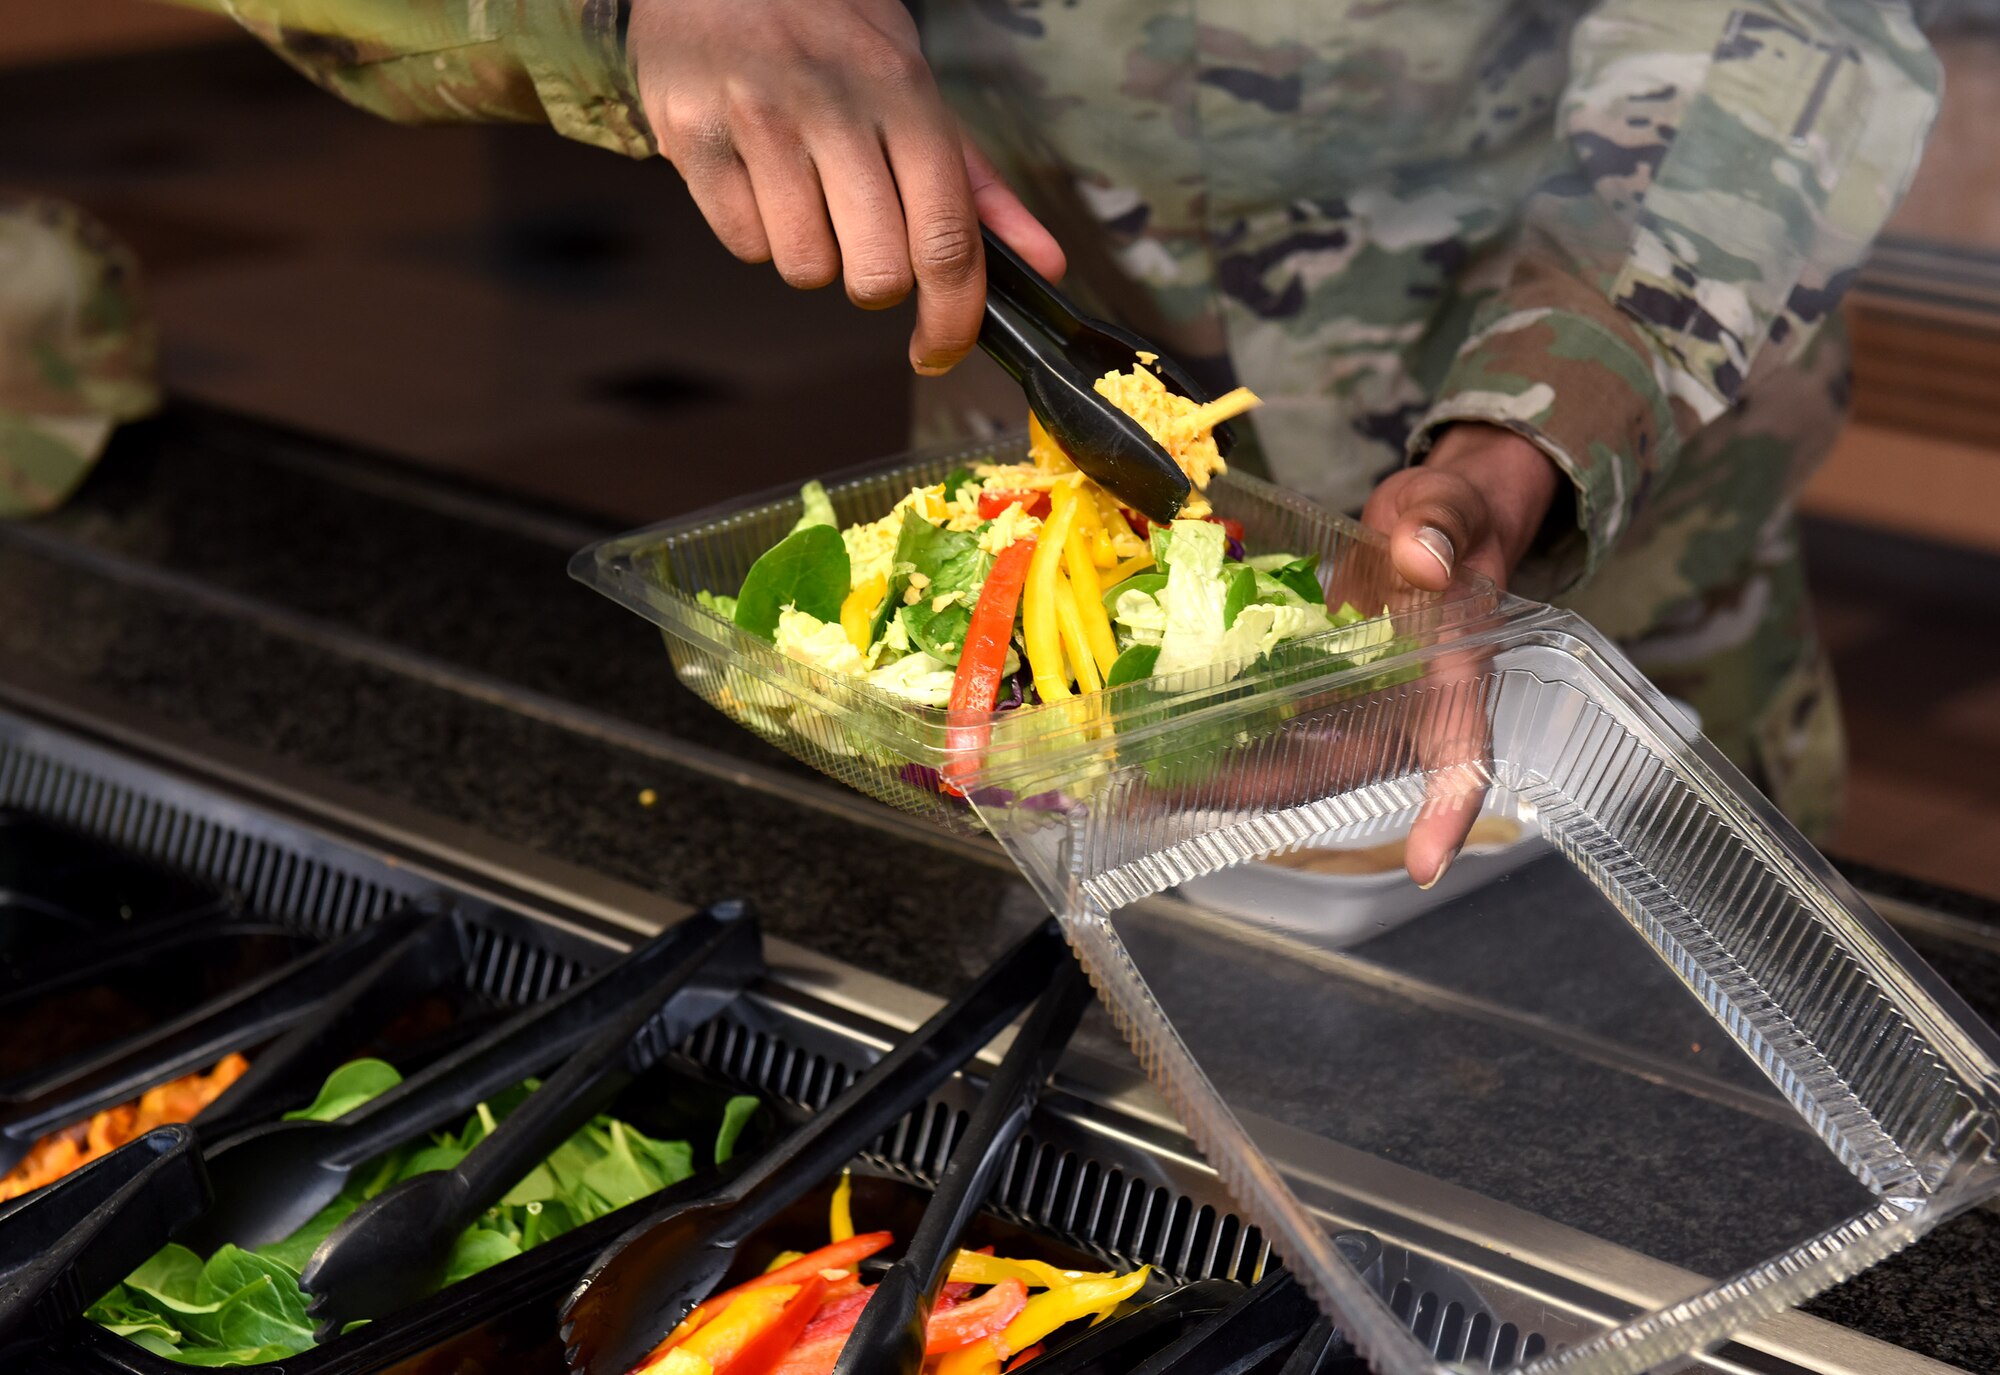 A customer at the Gateway Dining Facility fills a salad to-go box with a variety of fresh vegetables as part of his lunch at Royal Air Force Mildenhall, England, March 24, 2022. The DFAC provides a variety of different meal choices throughout the day for Team Mildenhall Airmen and civilians. (U.S. Air Force photo by Karen Abeyasekere)